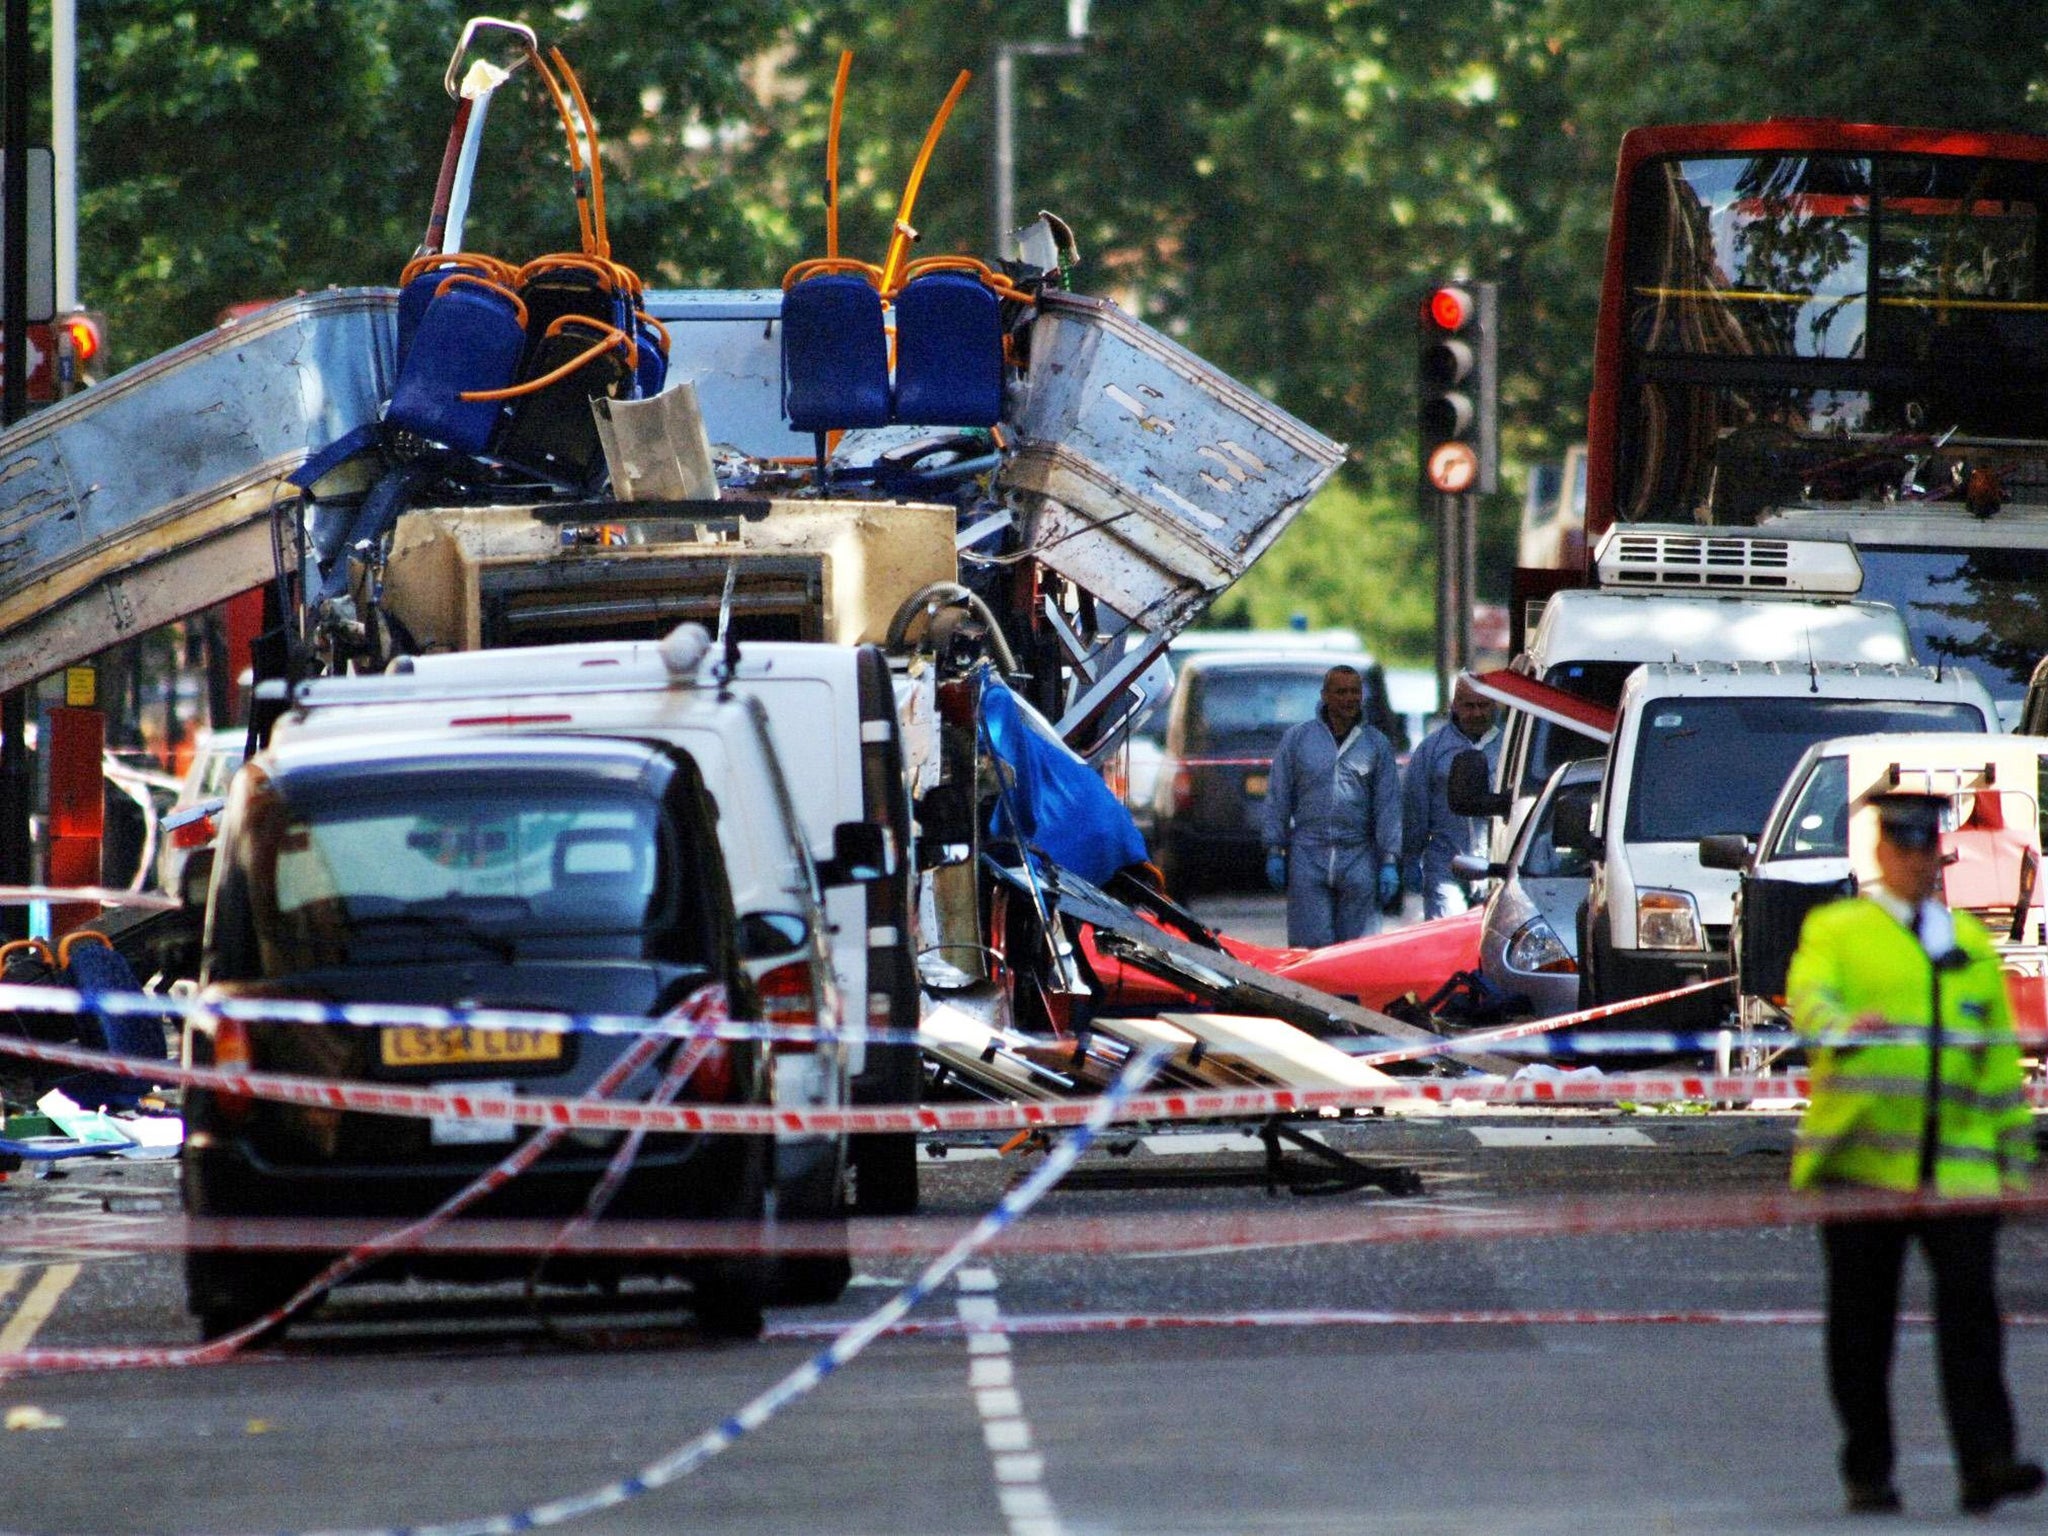 The tenth anniversary of the 7/7 terrorist attack approaches